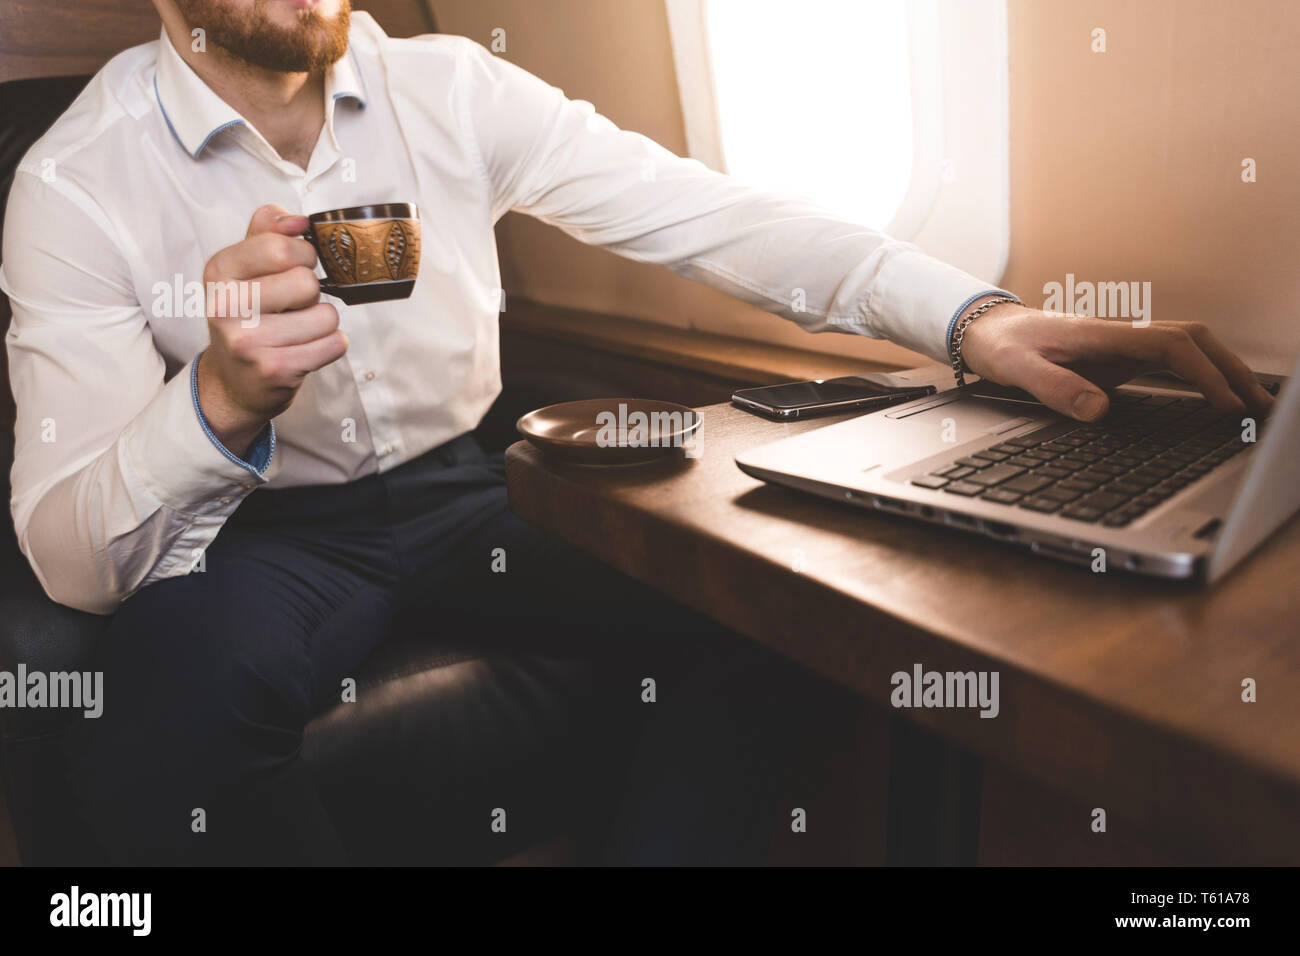 Attractive and successful businessman drinking coffee and working behind a laptop while sitting in a chair of his private jet. Stock Photo